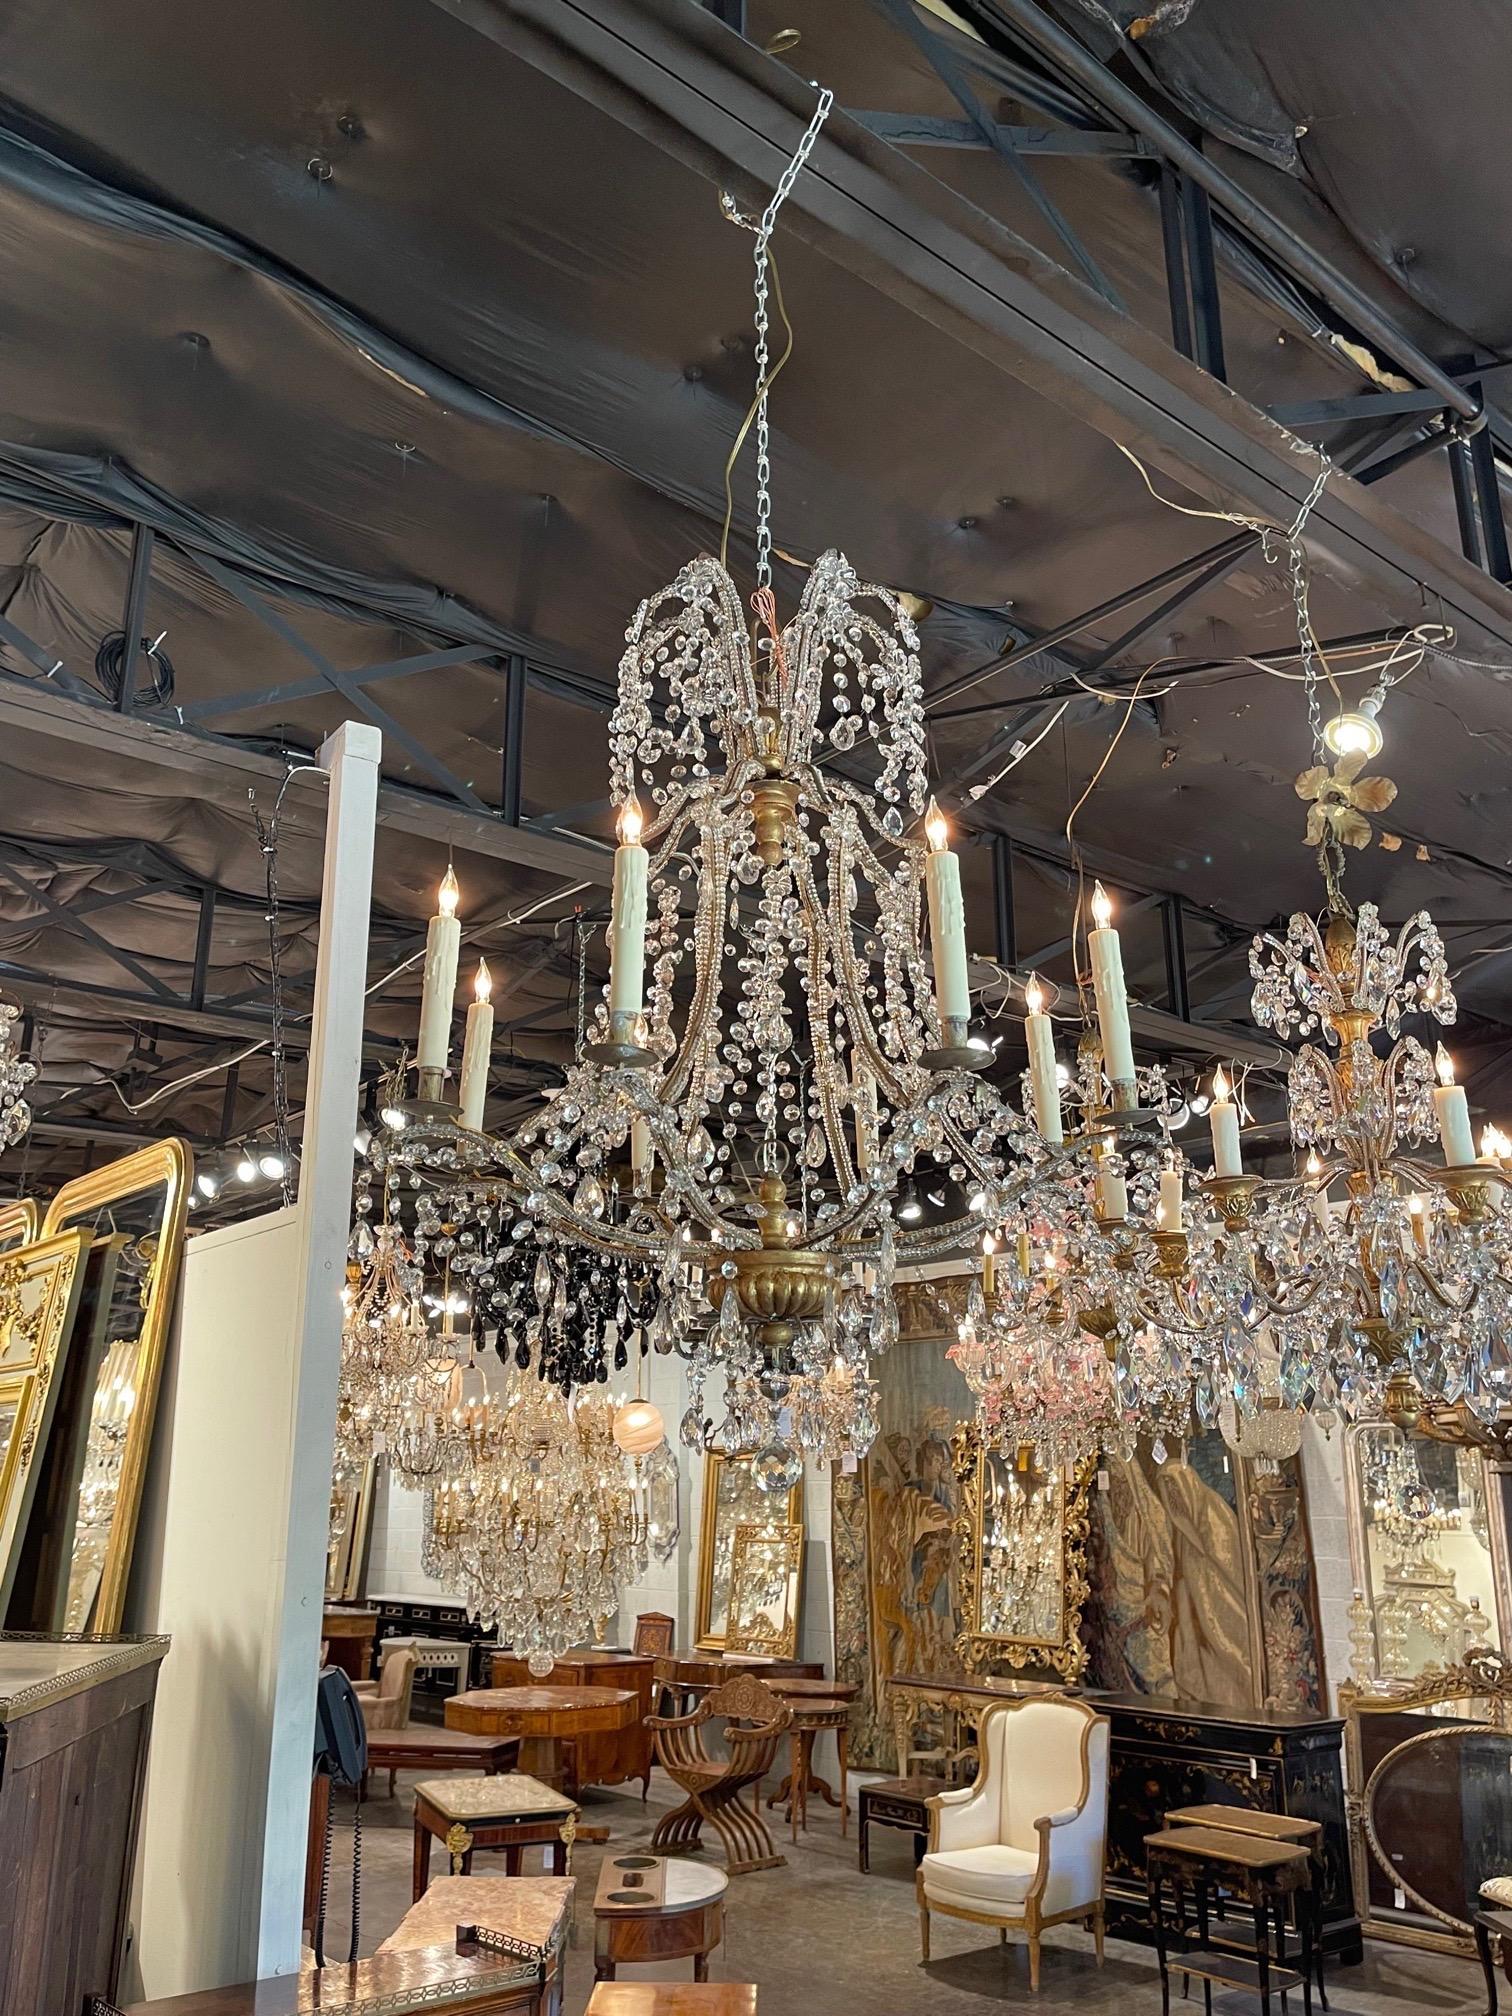 Elegant 19th century Italian beaded crystal pagoda form chandelier. Beautiful scale and shape on this piece and it is covered in gorgeous crystals. Exquisite!